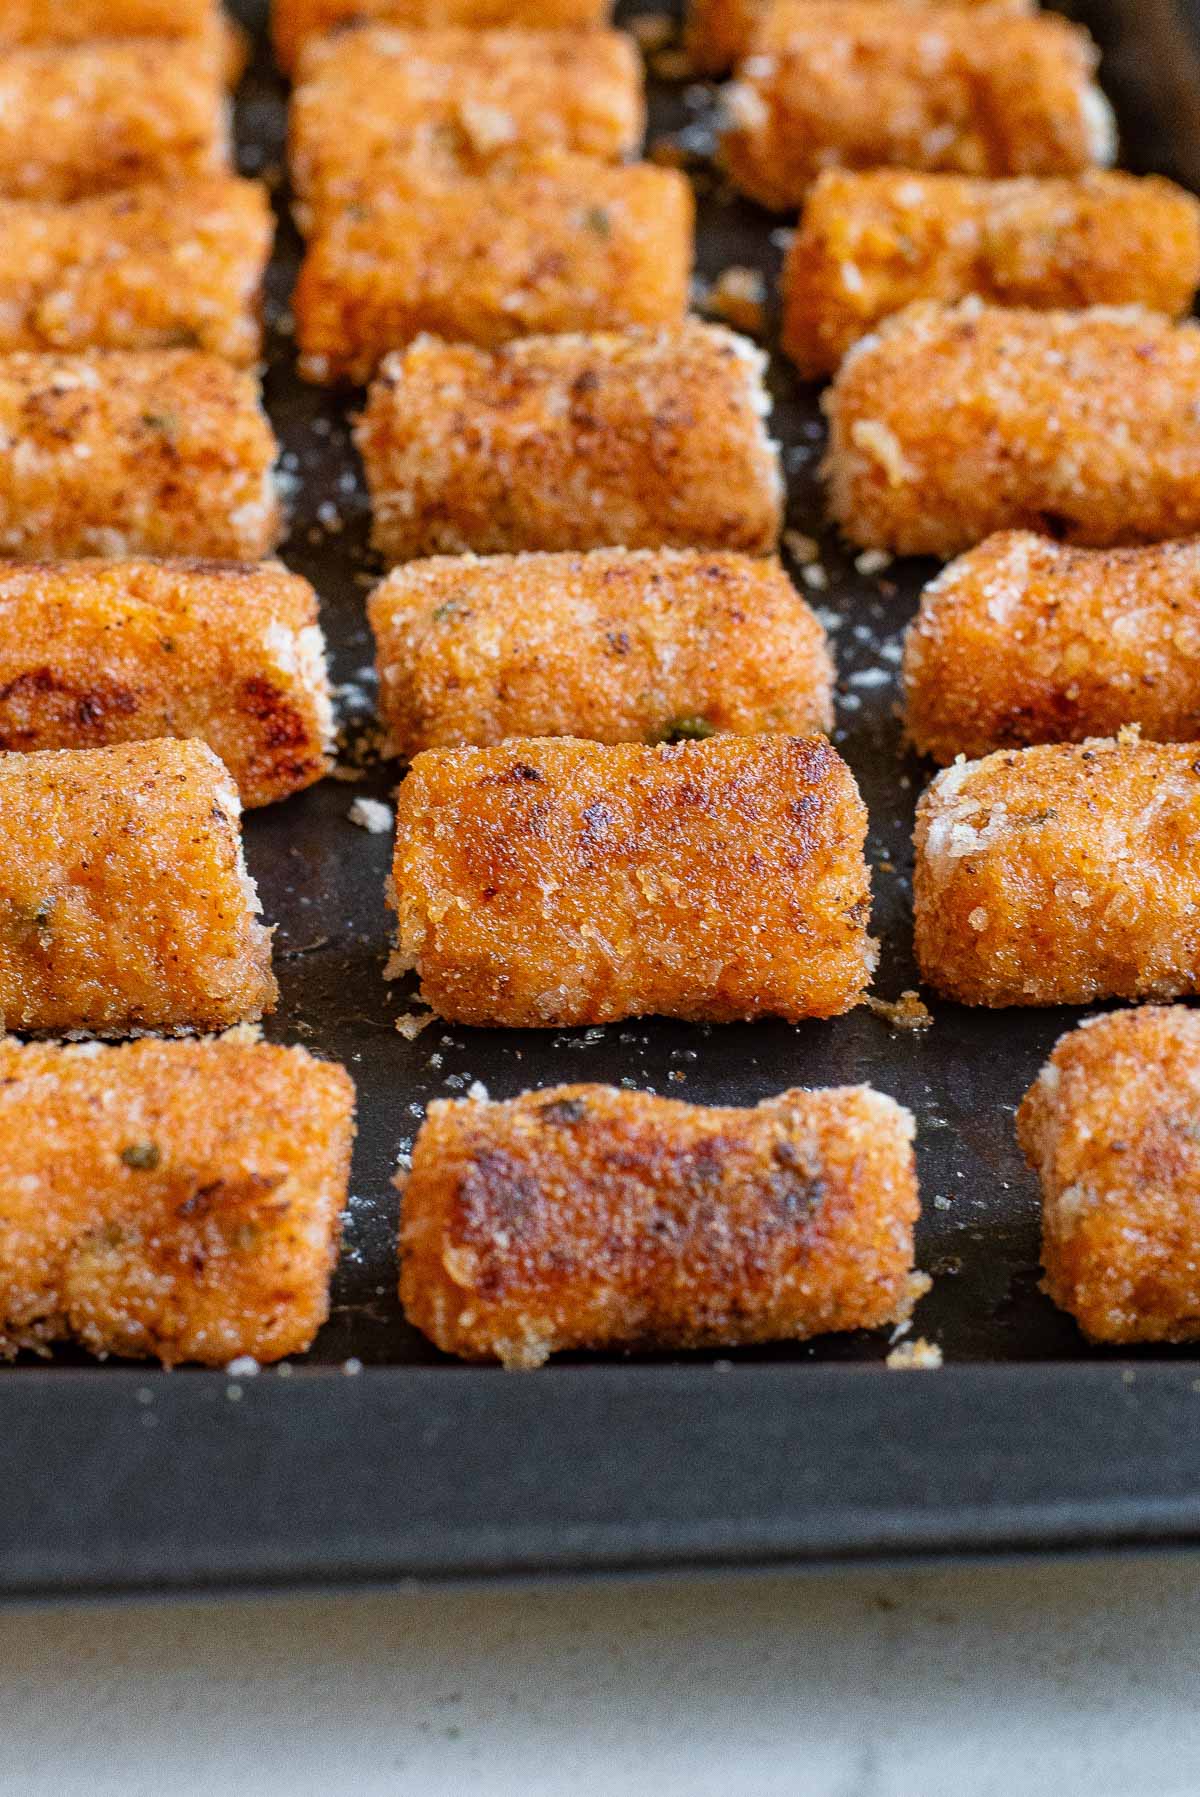 close up view of the cooked sweet potato tater tots on a baking sheet